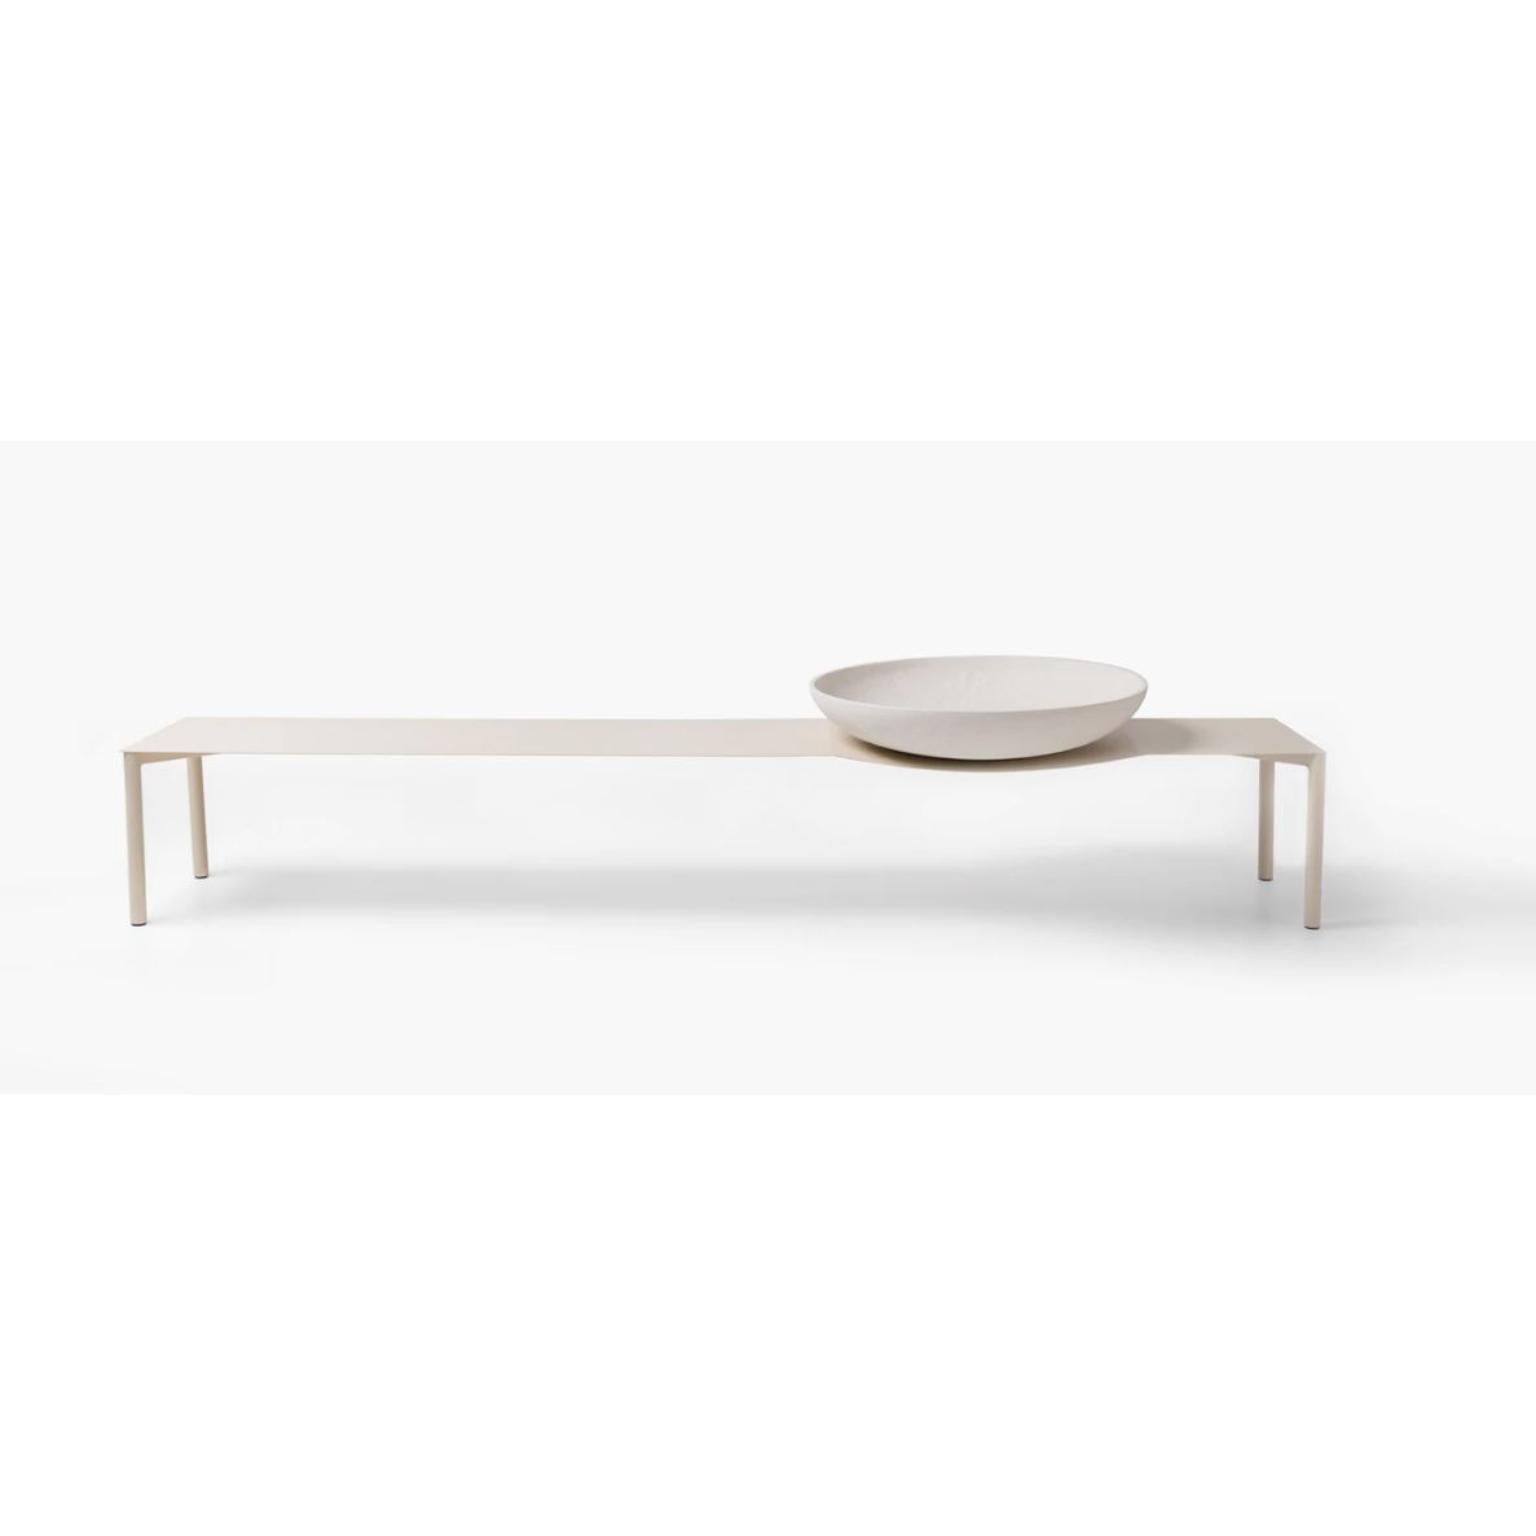 Bowl Coffee Table by Wentz
Dimensions: D 45 x W 165 x H 30 cm
Materials: Steel, Ceramic, Stainless Steel.
Coffee table with steel structure and top with textured electrostatic painting. Ceramic “Bowl” fixed to the top with a machined stainless steel